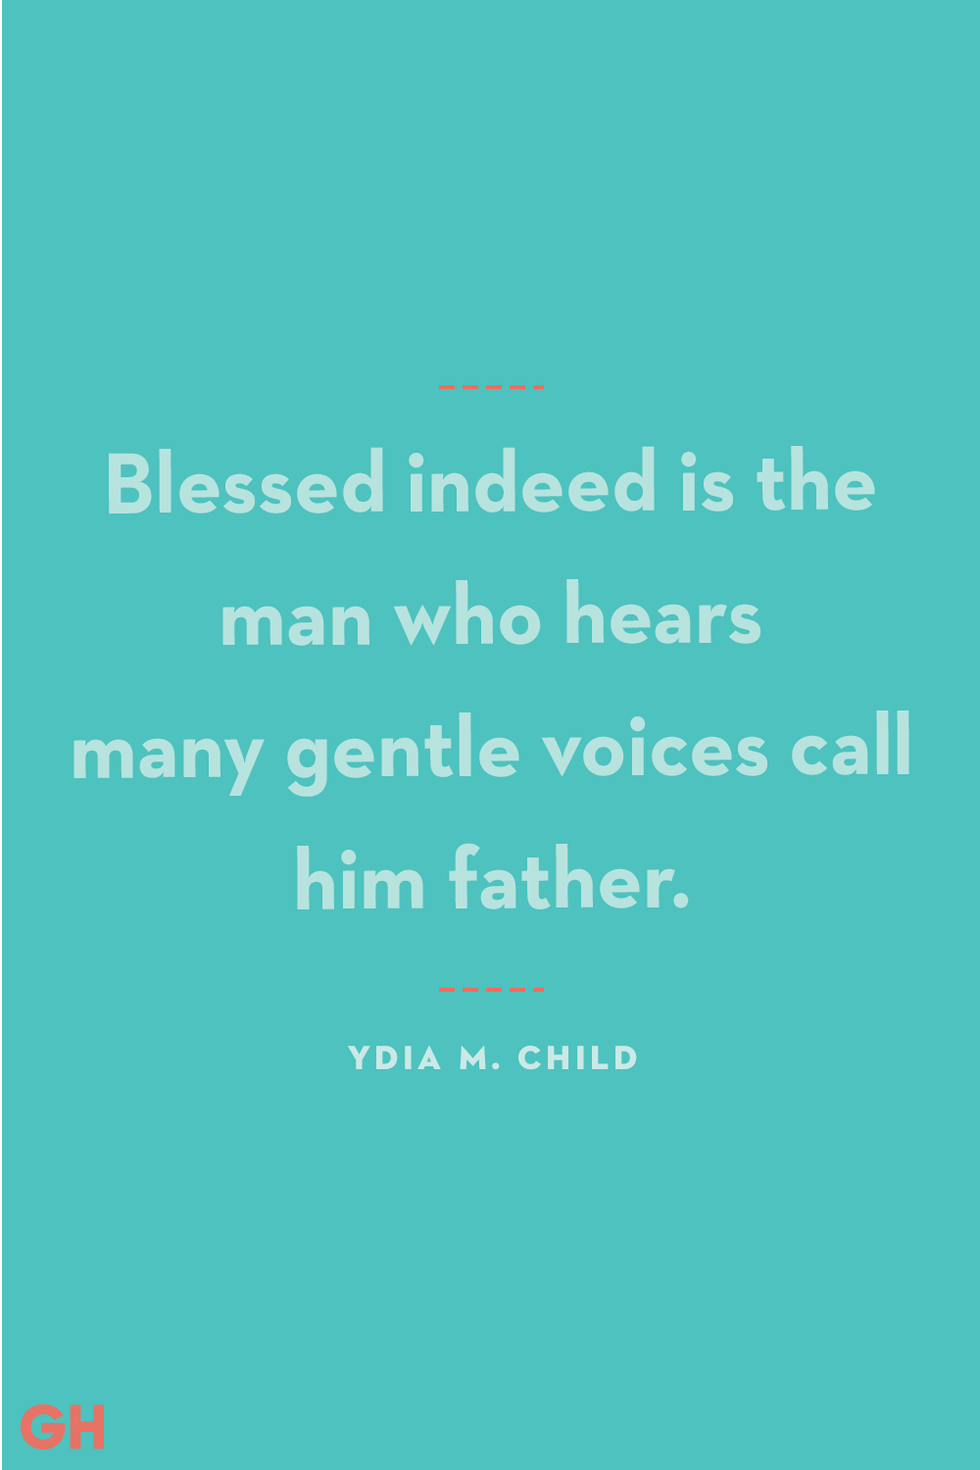 https://hips.hearstapps.com/hmg-prod/images/father-son-quotes-ydia-m-child-64483cc0714b6.png?crop=1xw:1xh;center,top&resize=980:*